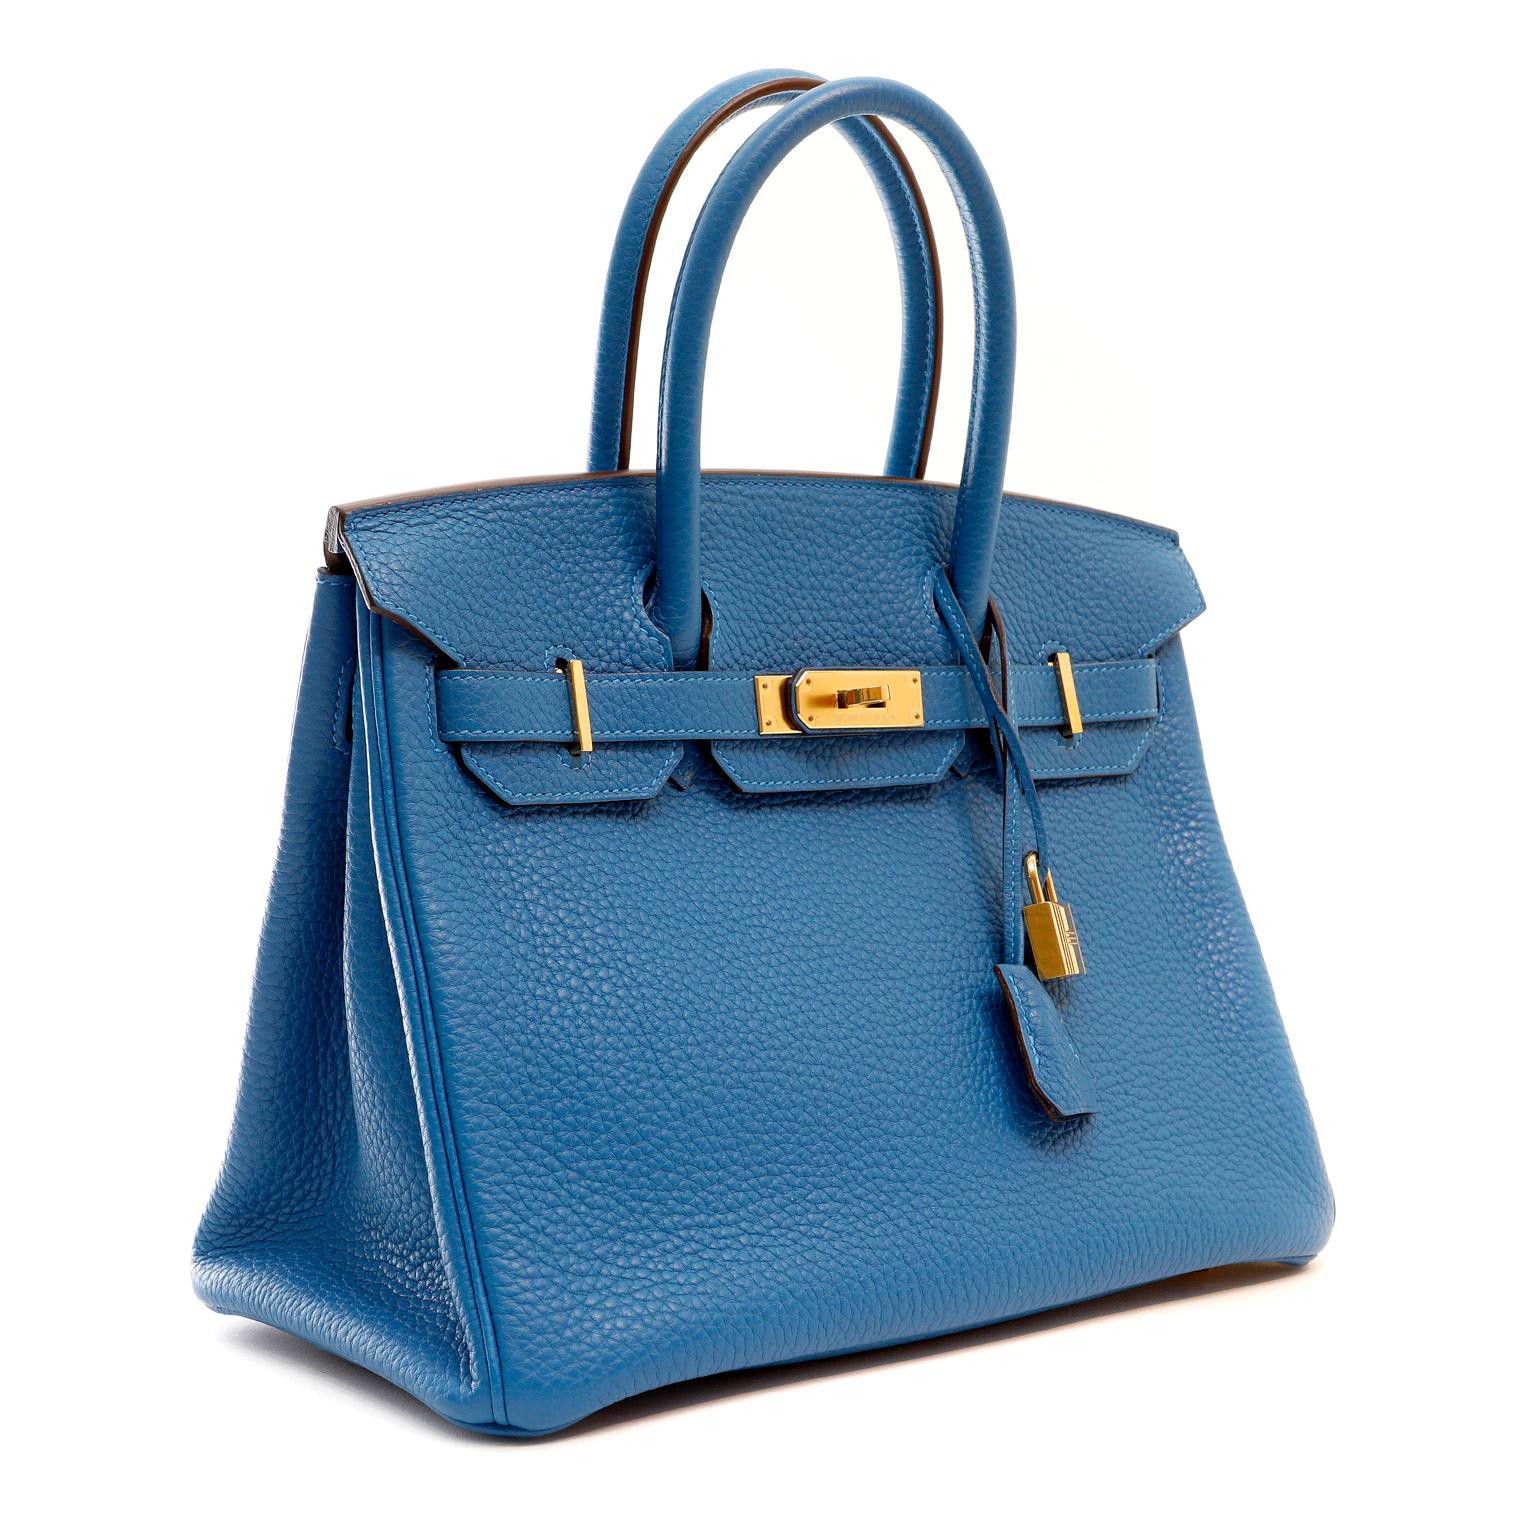 This authentic Hermès Azure Blue Togo 30 cm Birkin Bag is in pristine unworn condition with the protective plastic on hardware.  Particularly striking paired with gold hardware, this Birkin is a blue lover’s dream.

Togo is scratch resistant calf